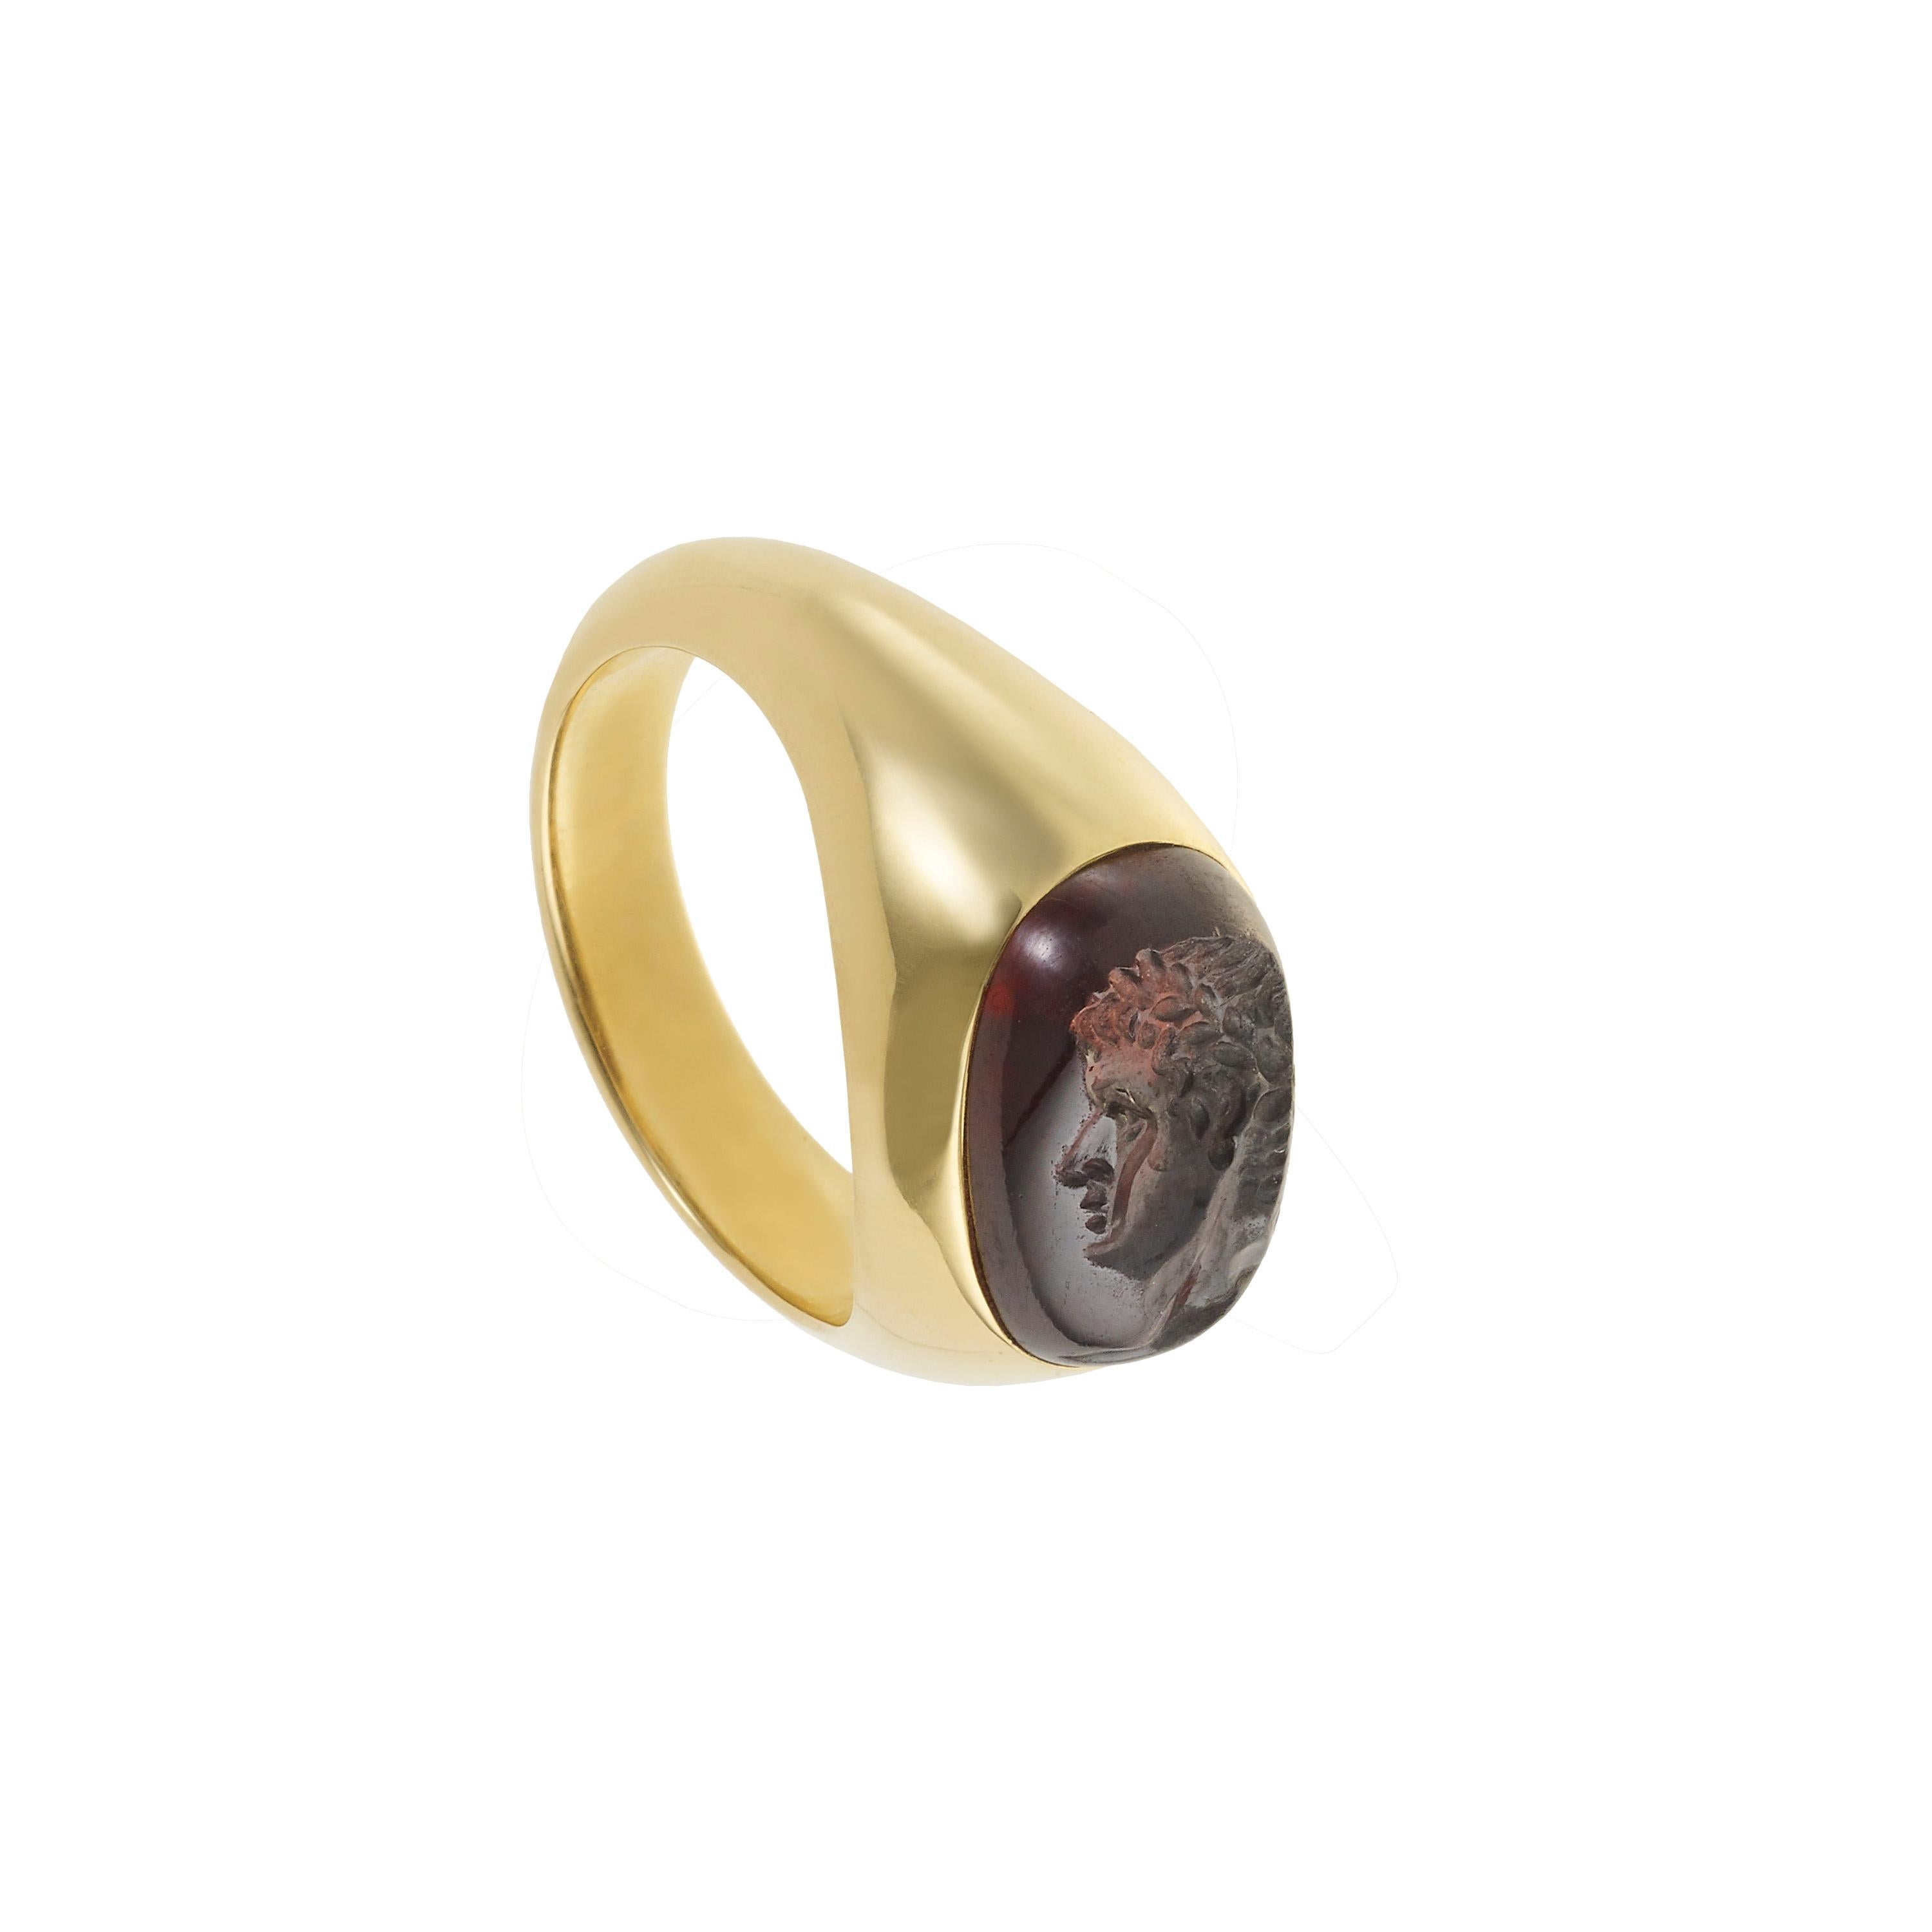 Victoria Strigini (b. 1991)

A contemporary 18k yellow gold ring, featuring a 2nd- 3rd century AD Roman cabochon intaglio in garnet, set in a strikingly pure, rounded modern mount. A wreathed young man in noble profile is delicately incised in the